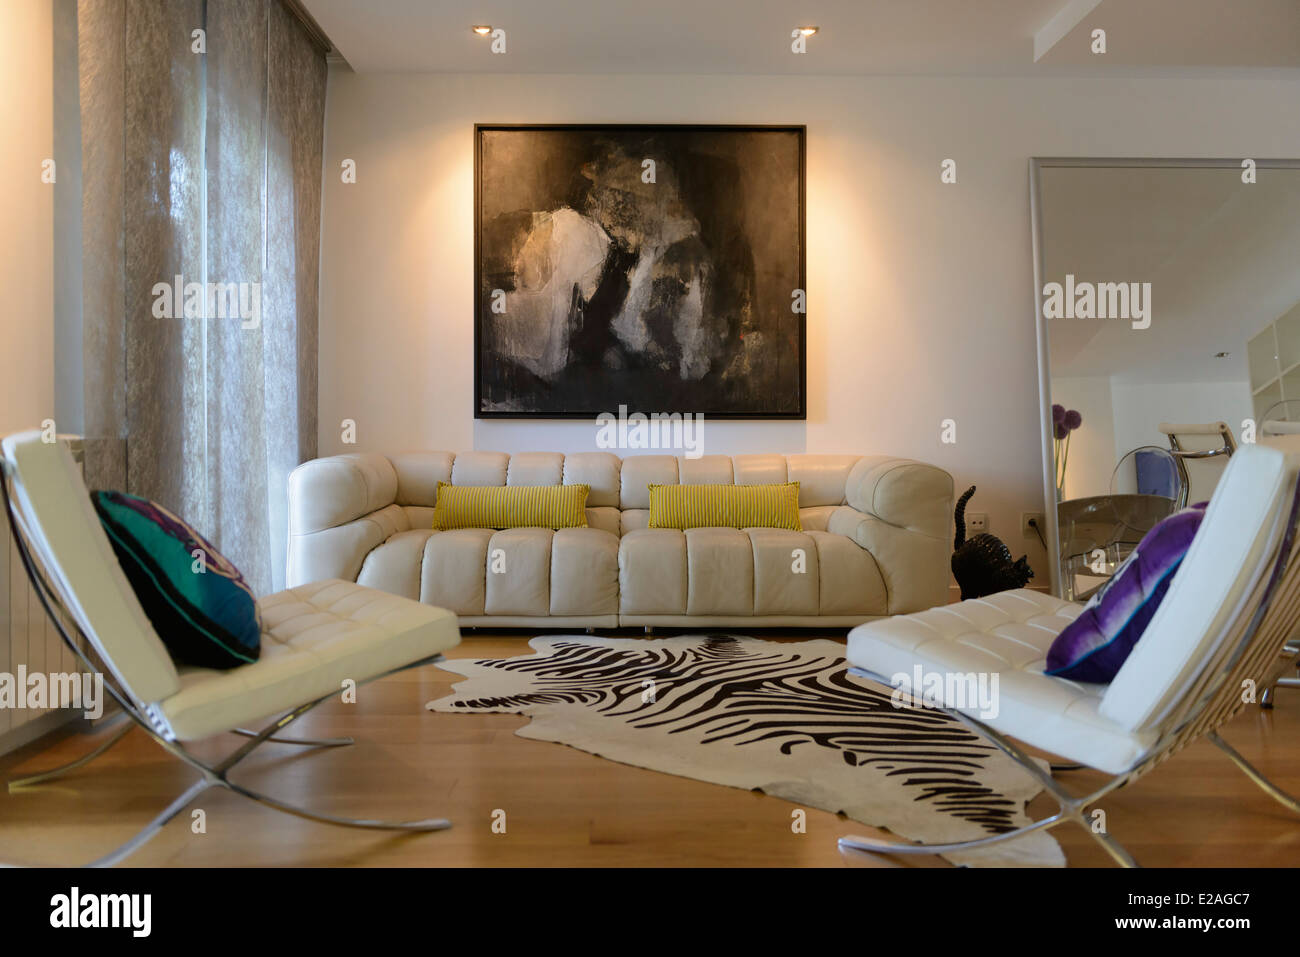 Living room with modern interior design Stock Photo